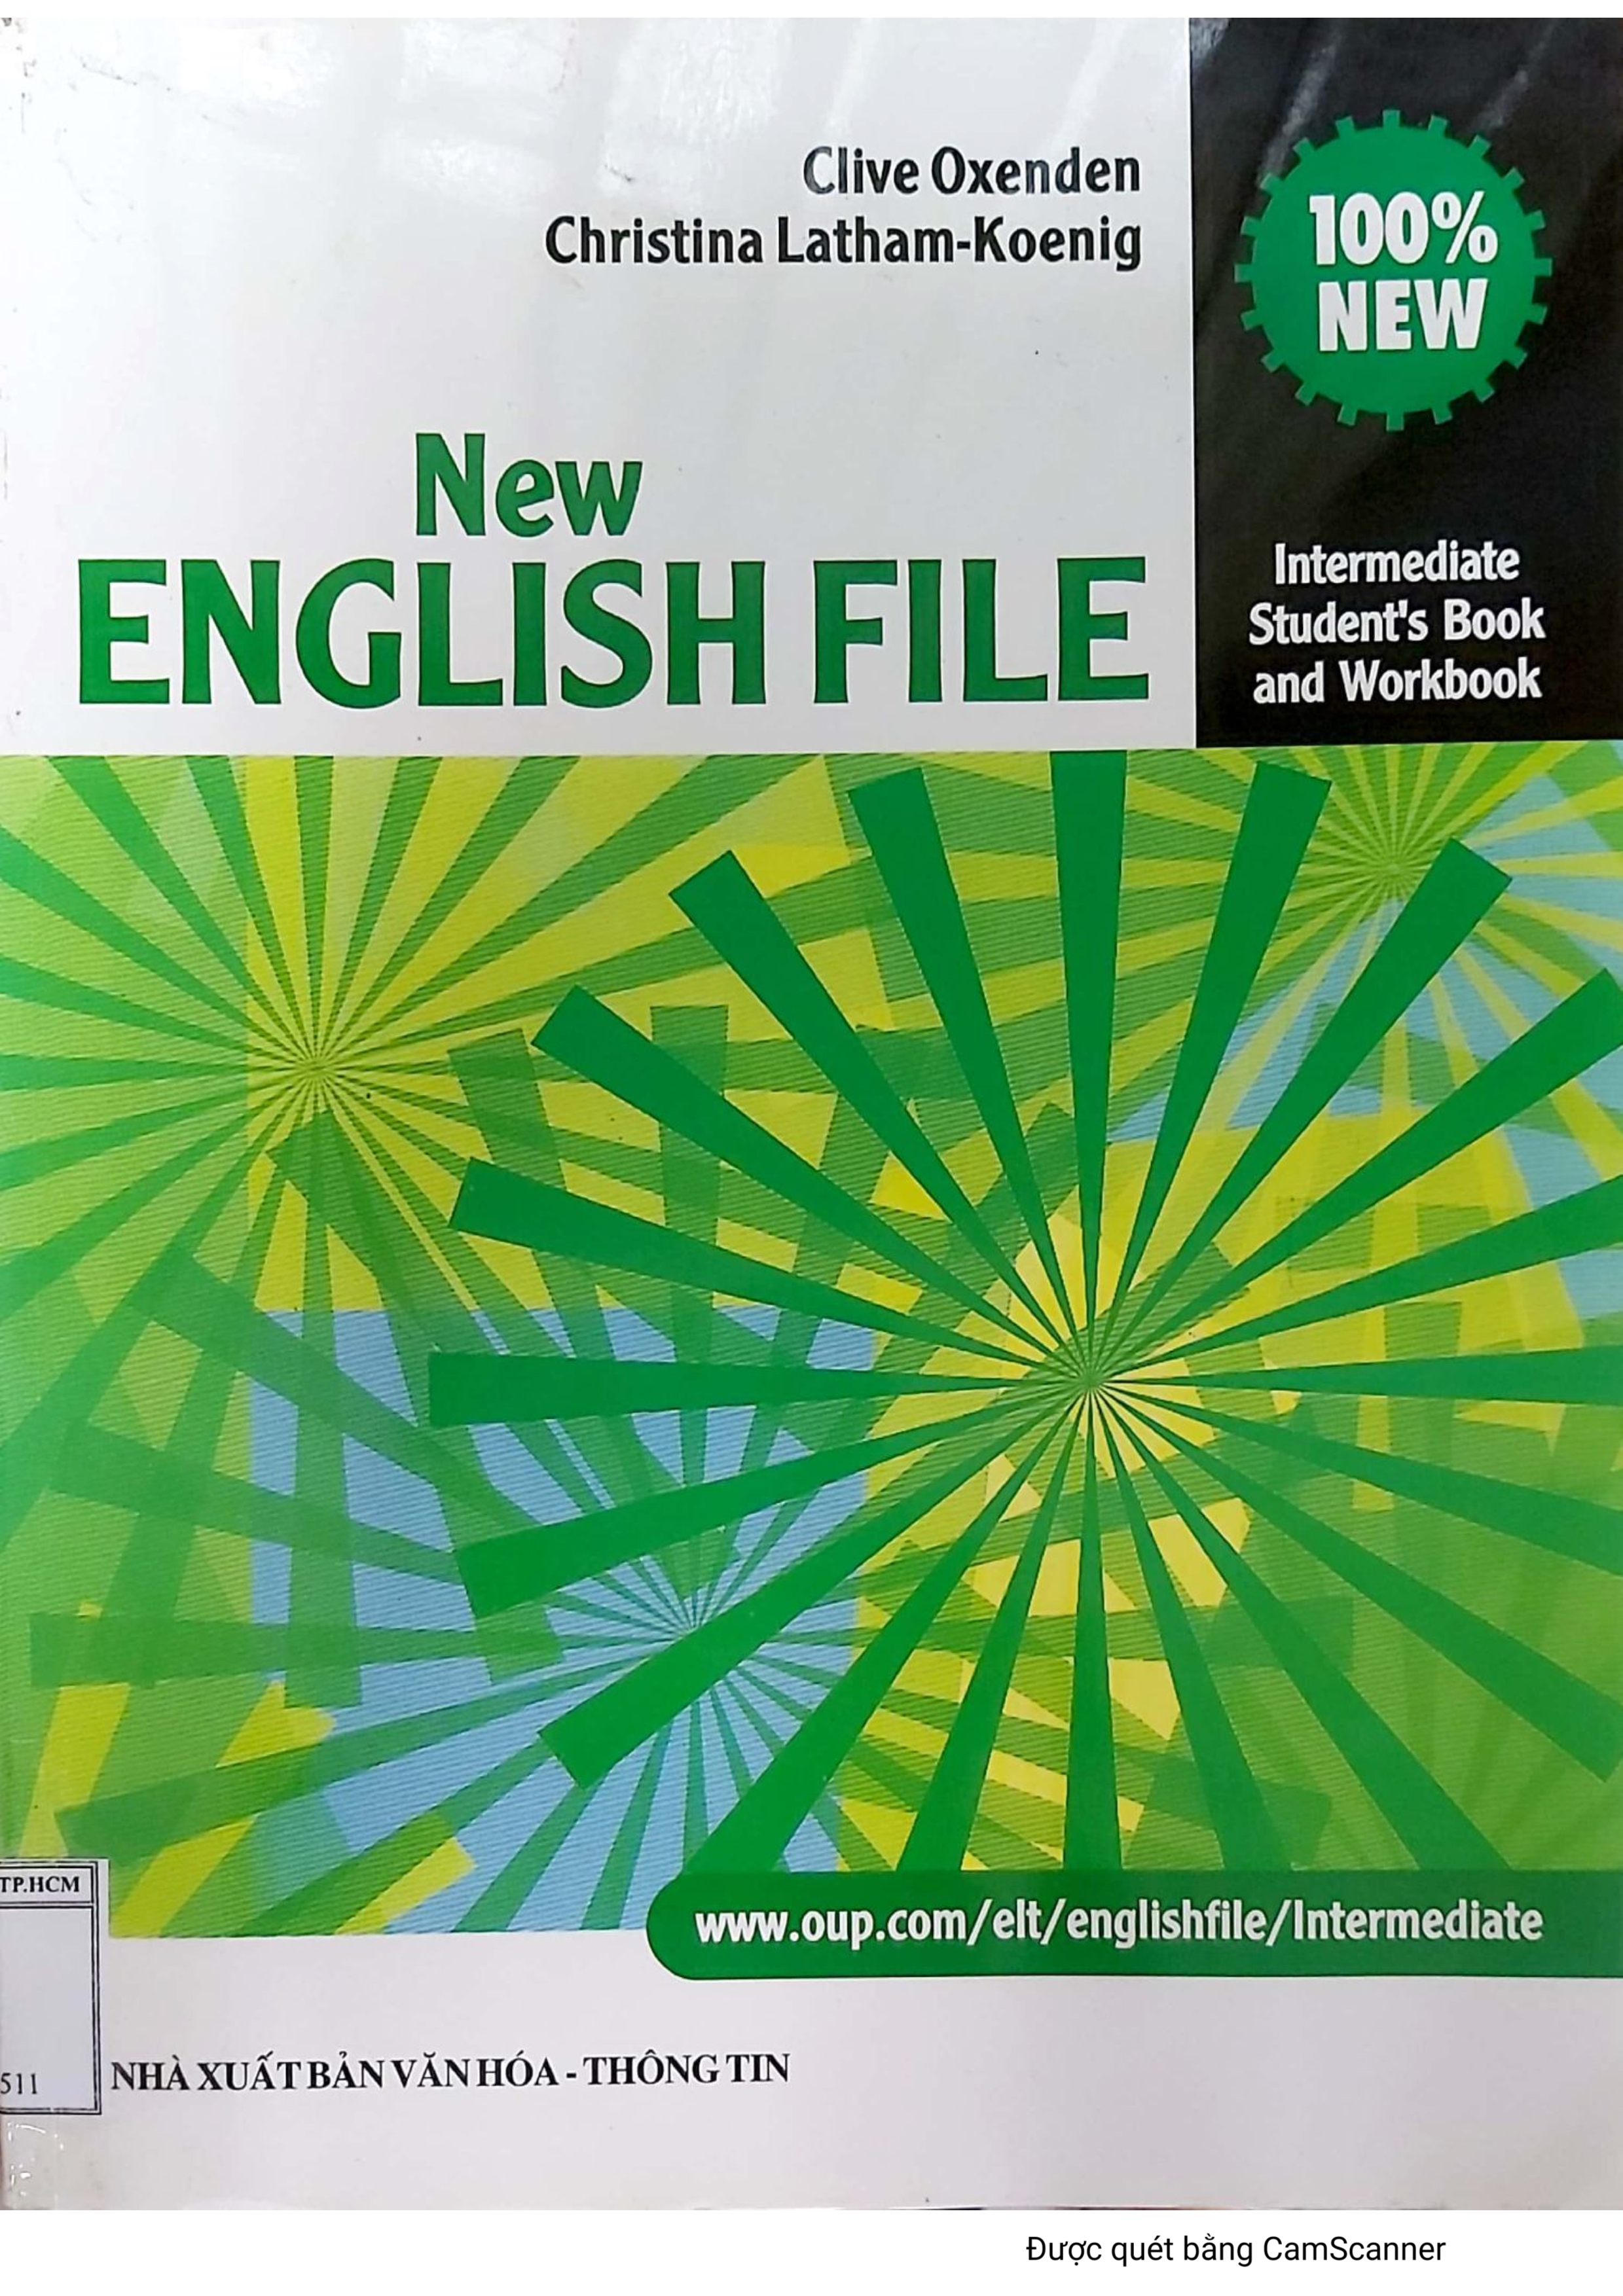 New English File Intermediate Student's Book and Workbook